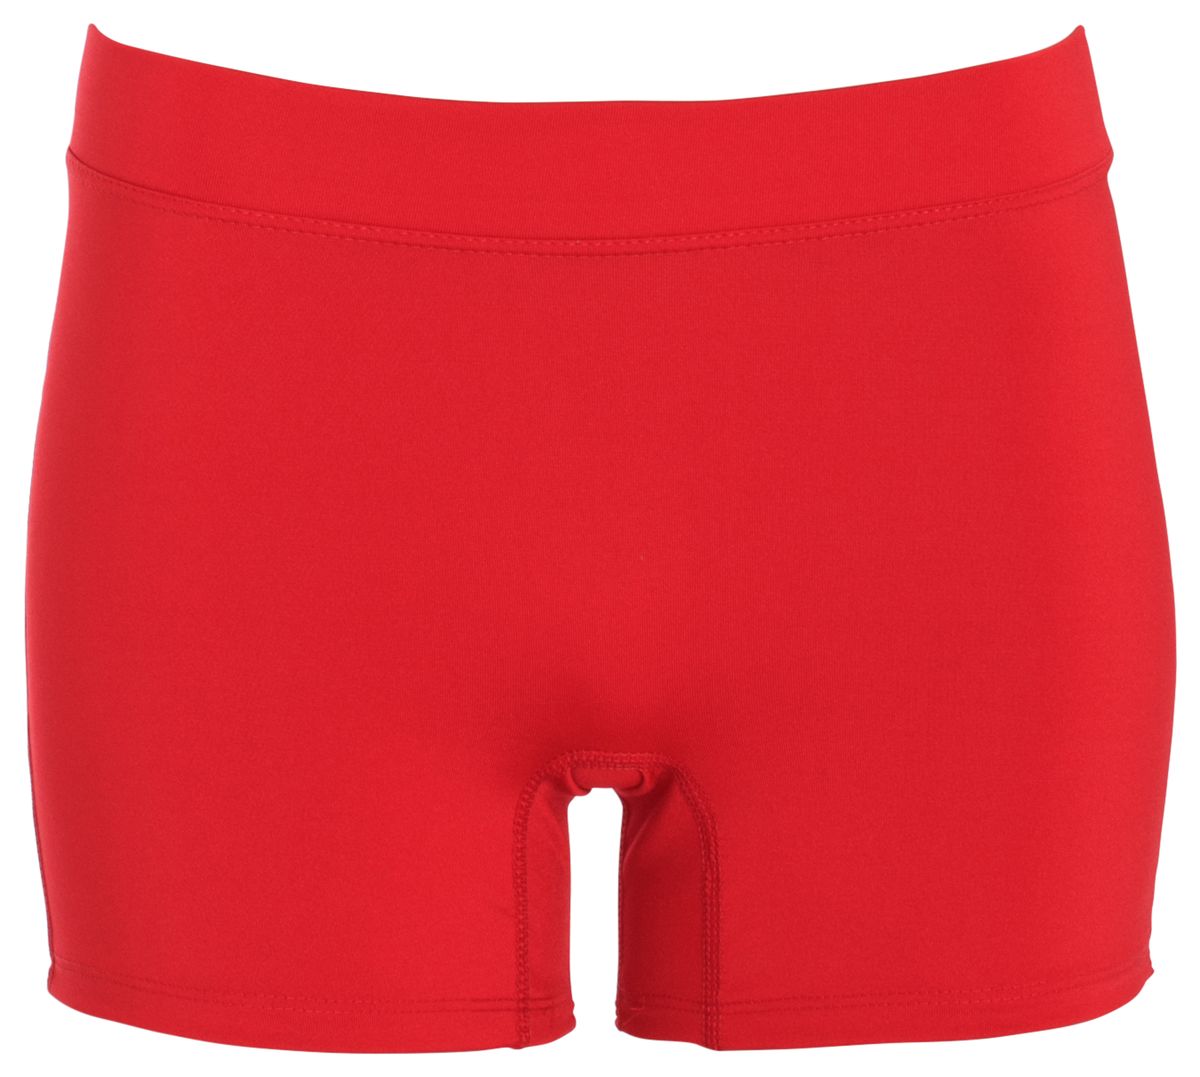 Augusta Sportswear Women's Enthuse Volleyball Short, Red, M - image 3 of 5